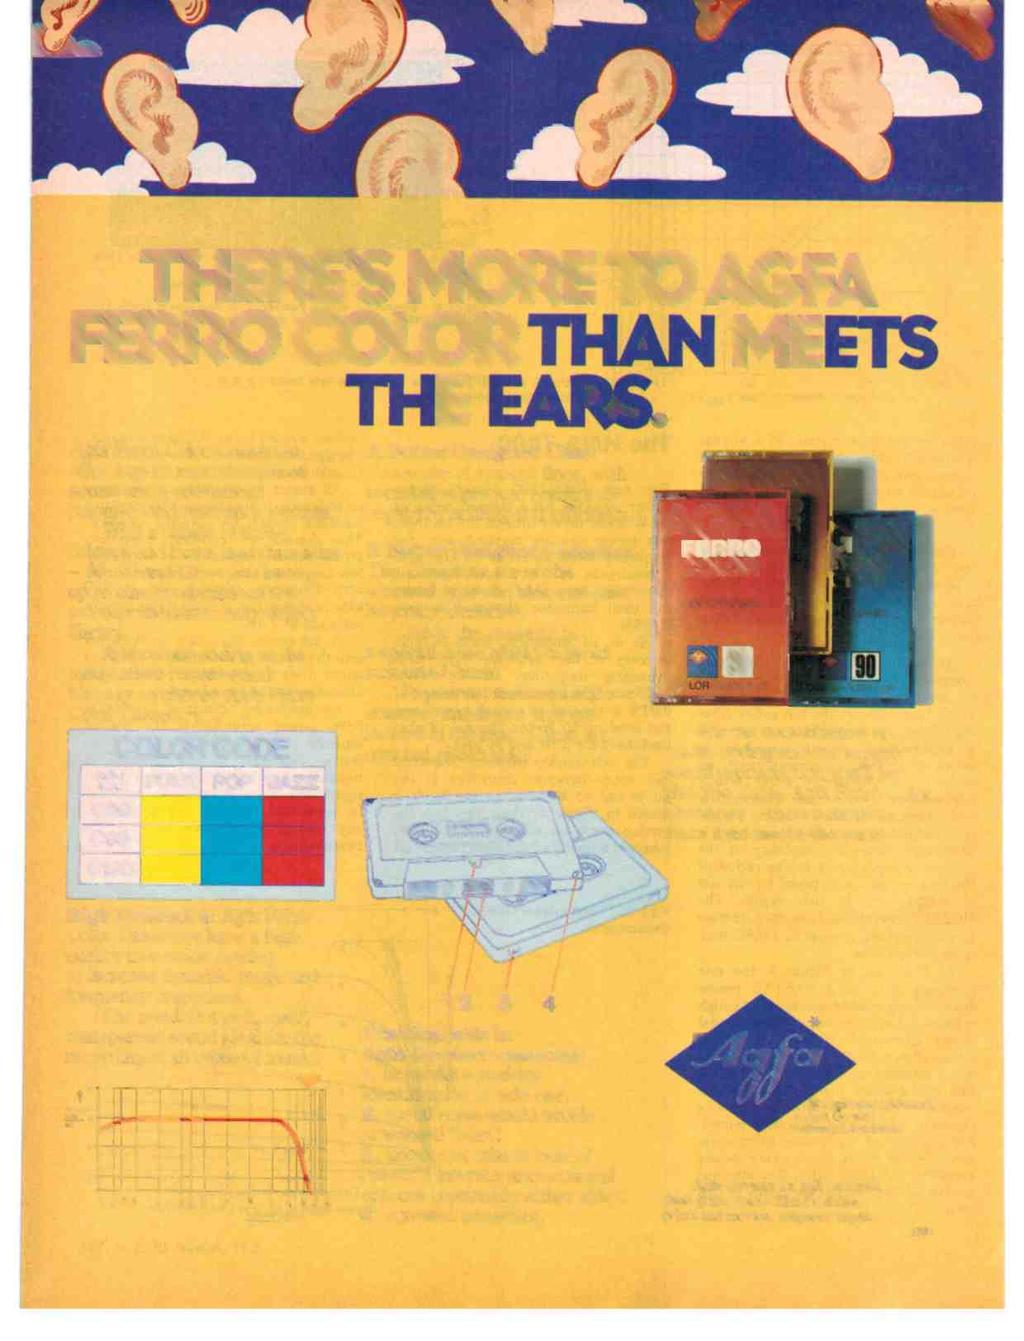 . AC3r'AGE:VAt=R r ThERE'S MORE 10 AGFA FERROCOLOR A ME Agfa Ferro Color Cassettes offer superb reproduction of sound and a convenient colour -coded reference system.